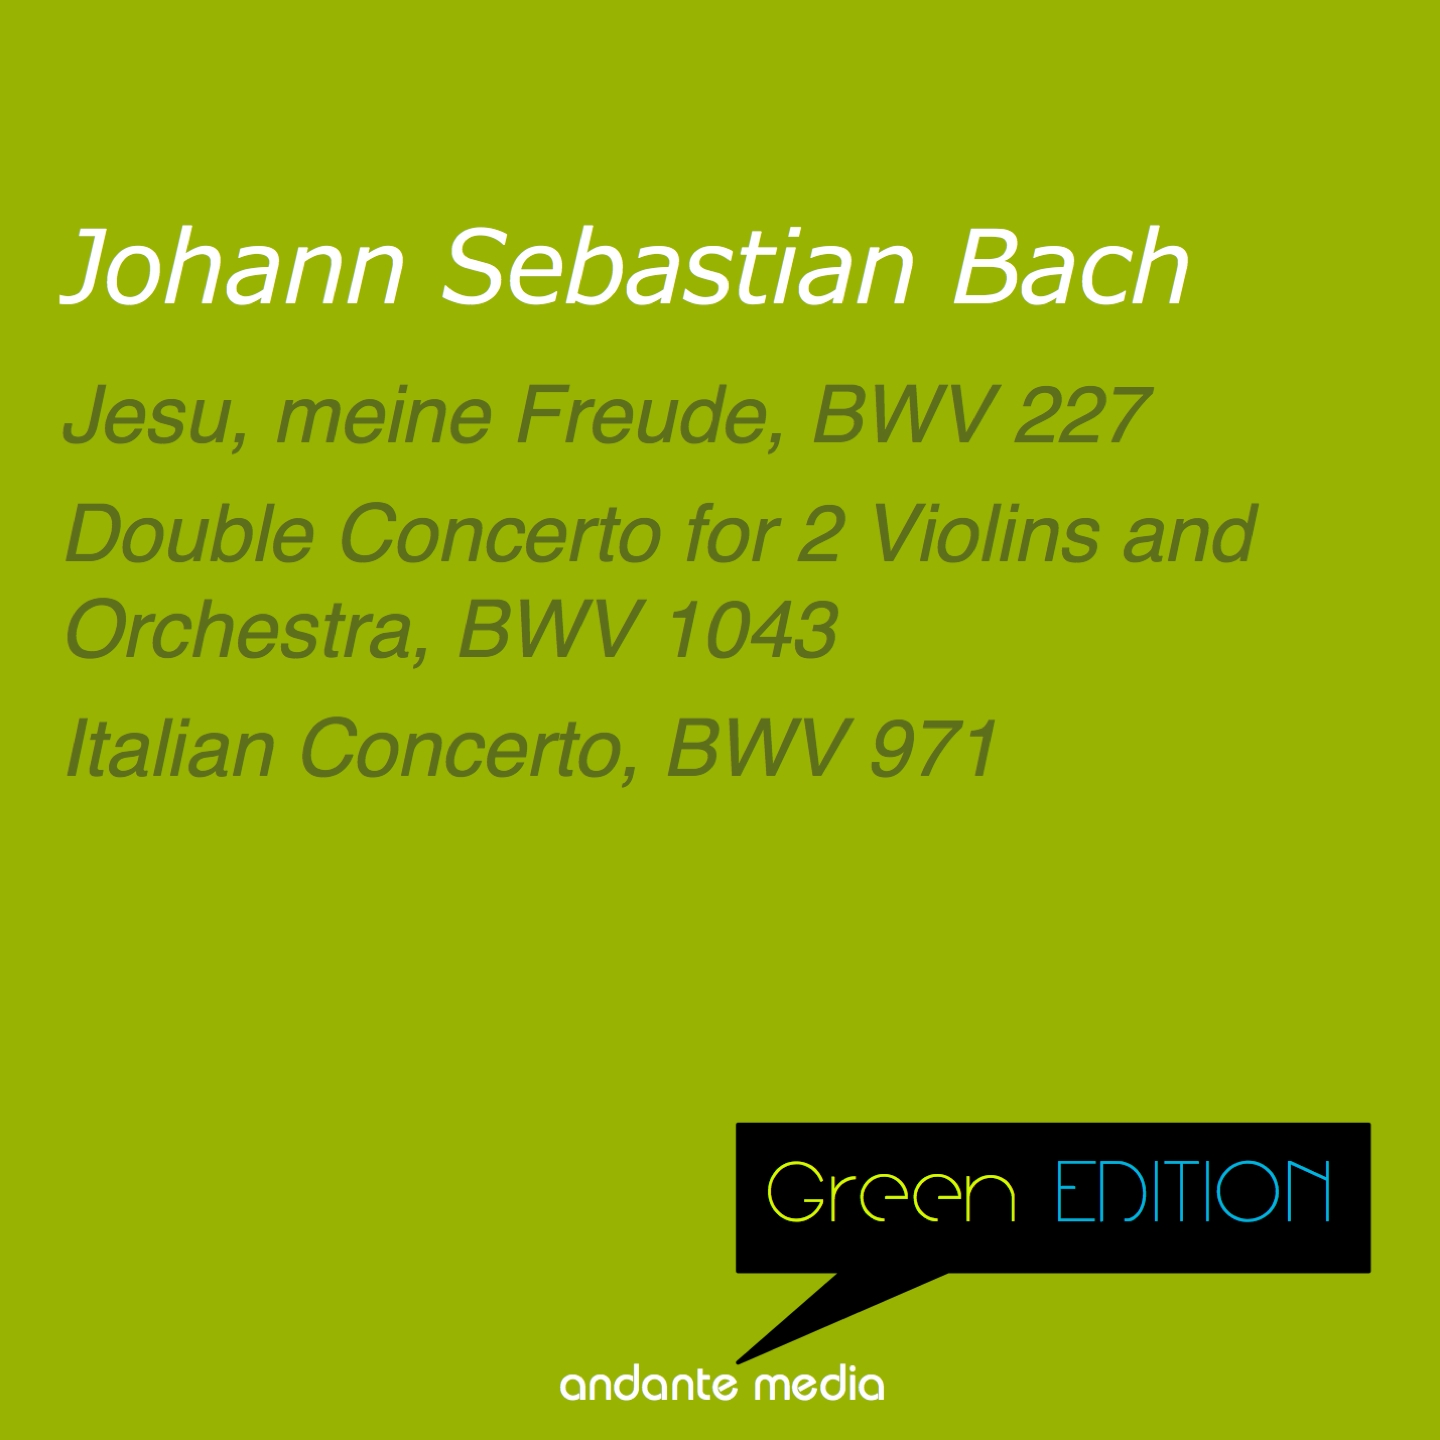 Green Edition - Bach: Jesu, meine Freude, BWV 227 & Double Concerto for 2 Violins and Orchestra, BWV 1043